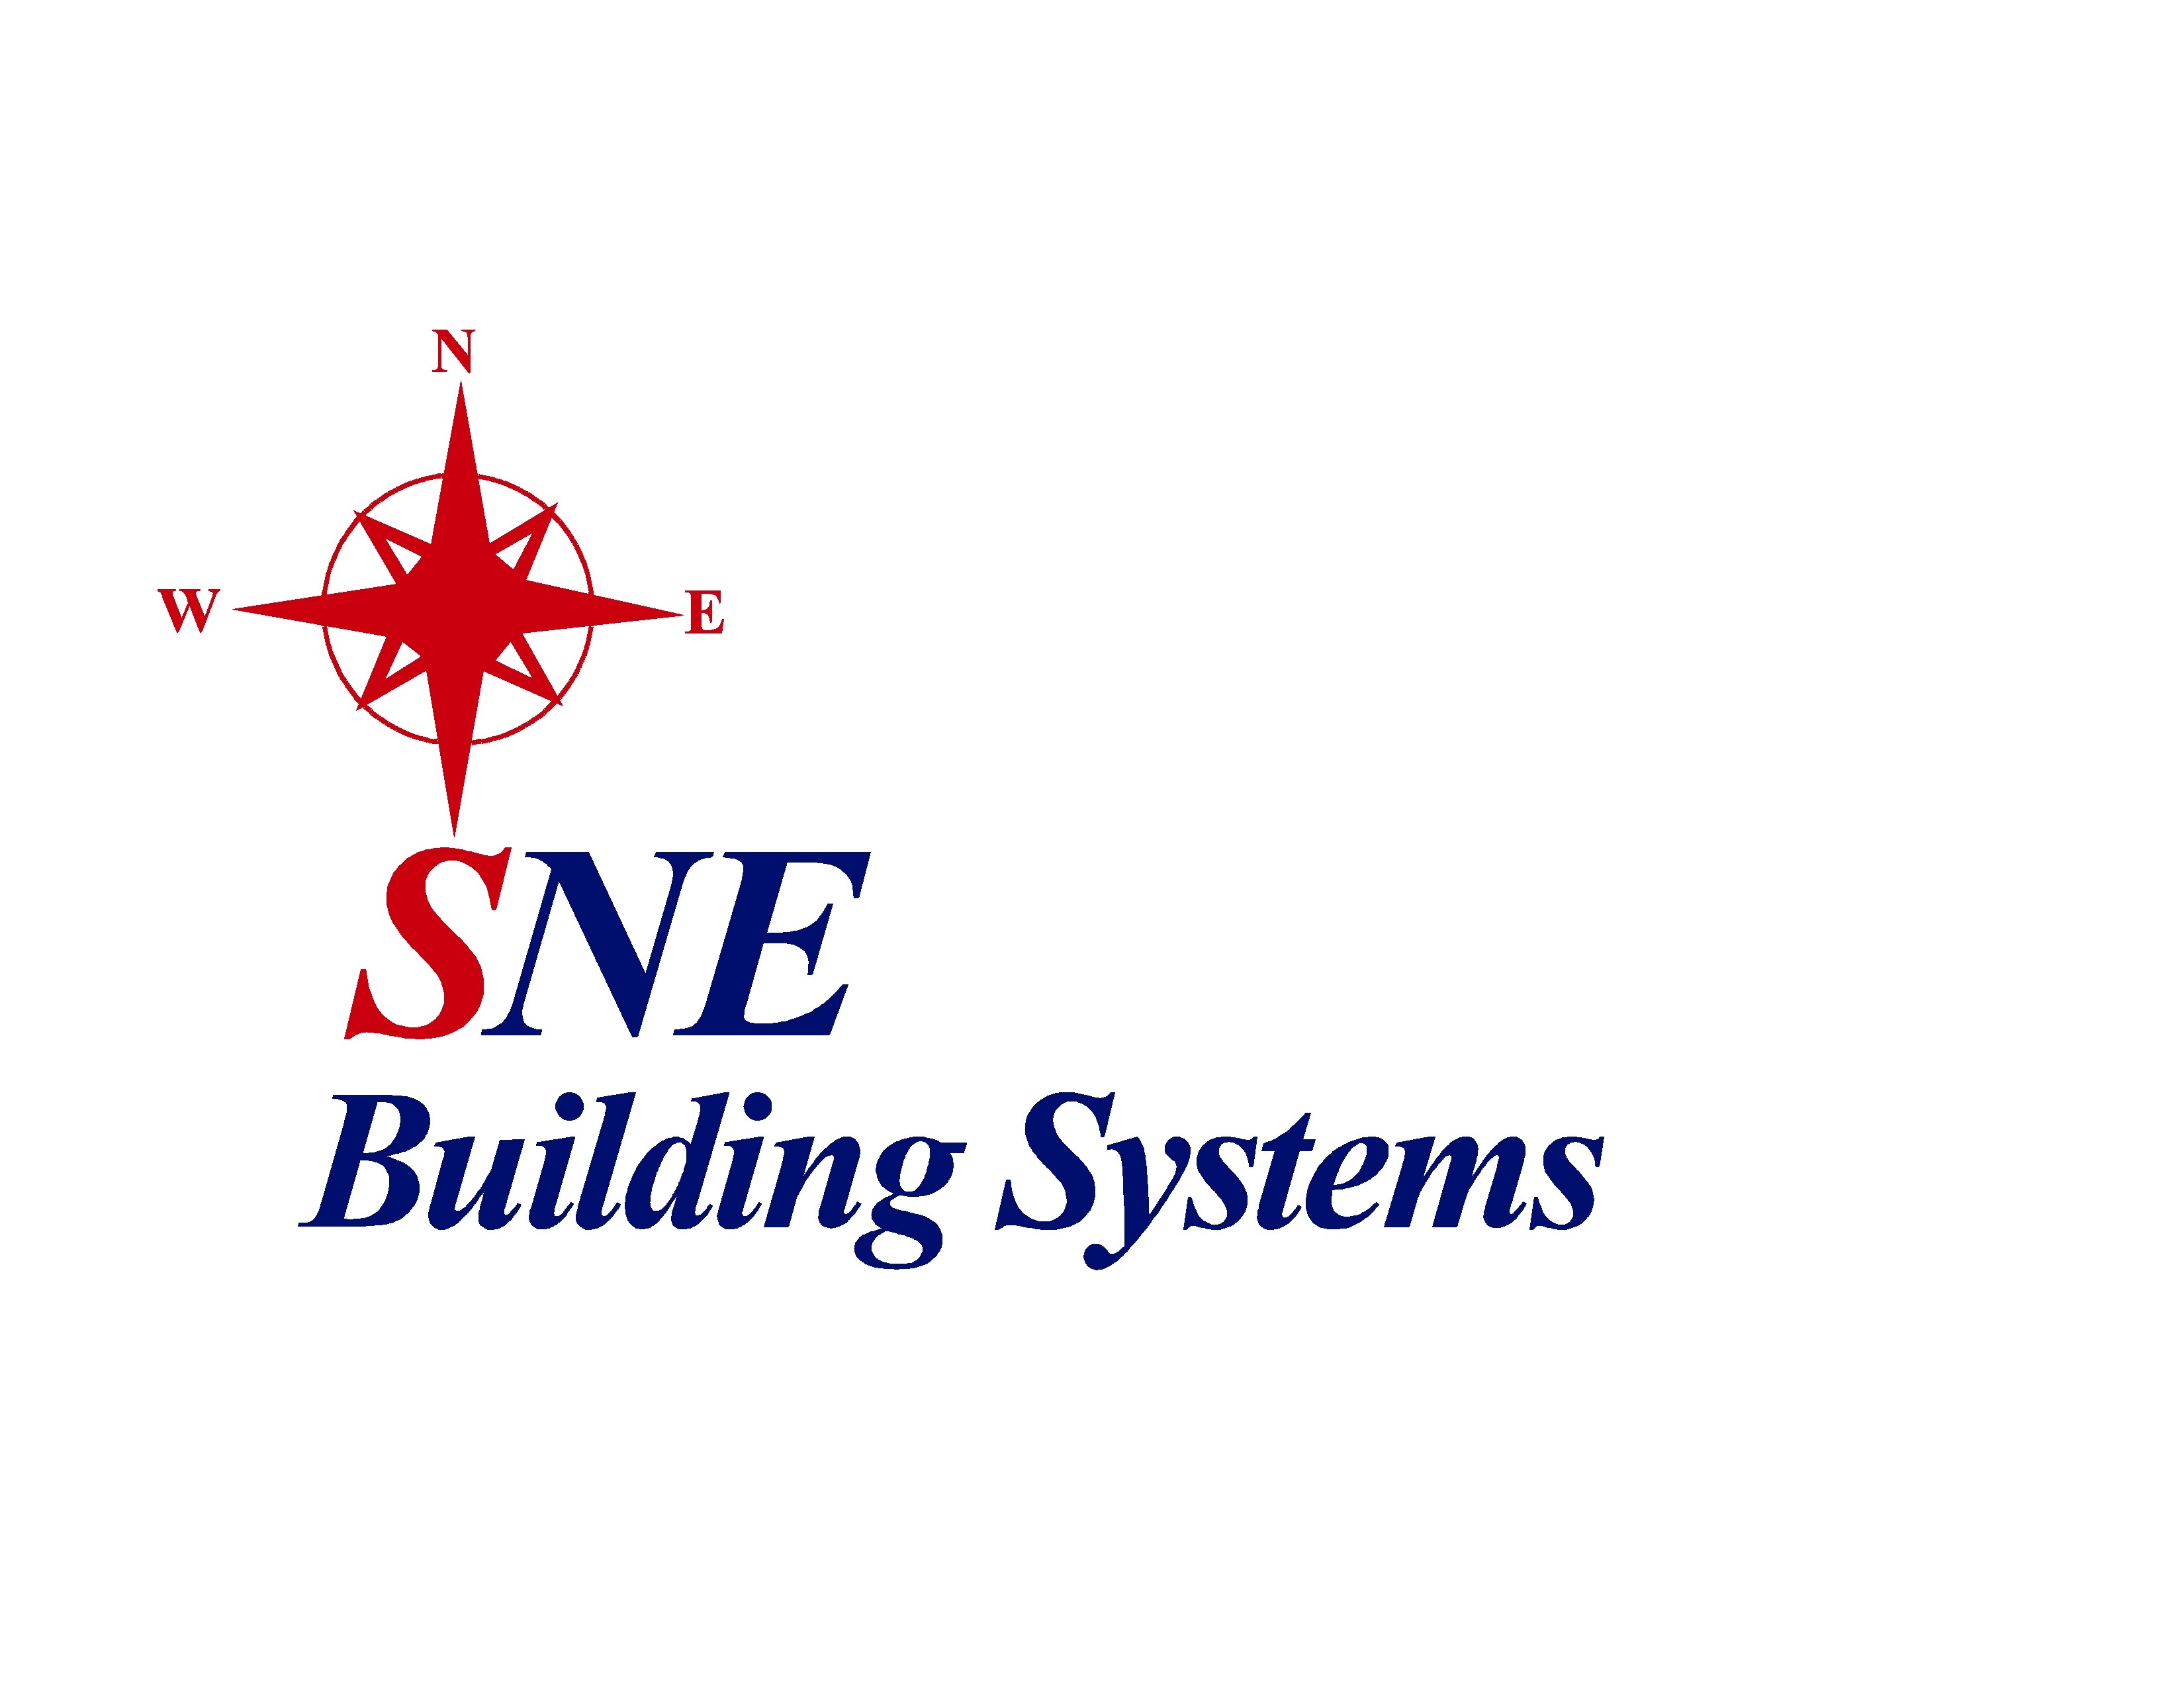 SNE Building Systems logo